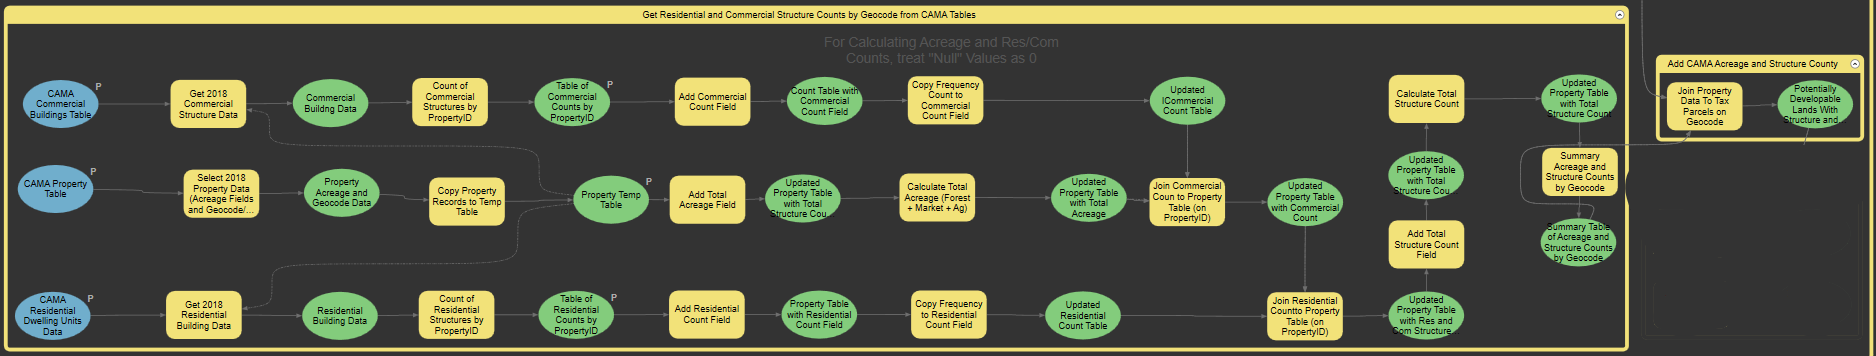 model for summarizing property assessment information (i.e. structure count) and joining to tax parcel data